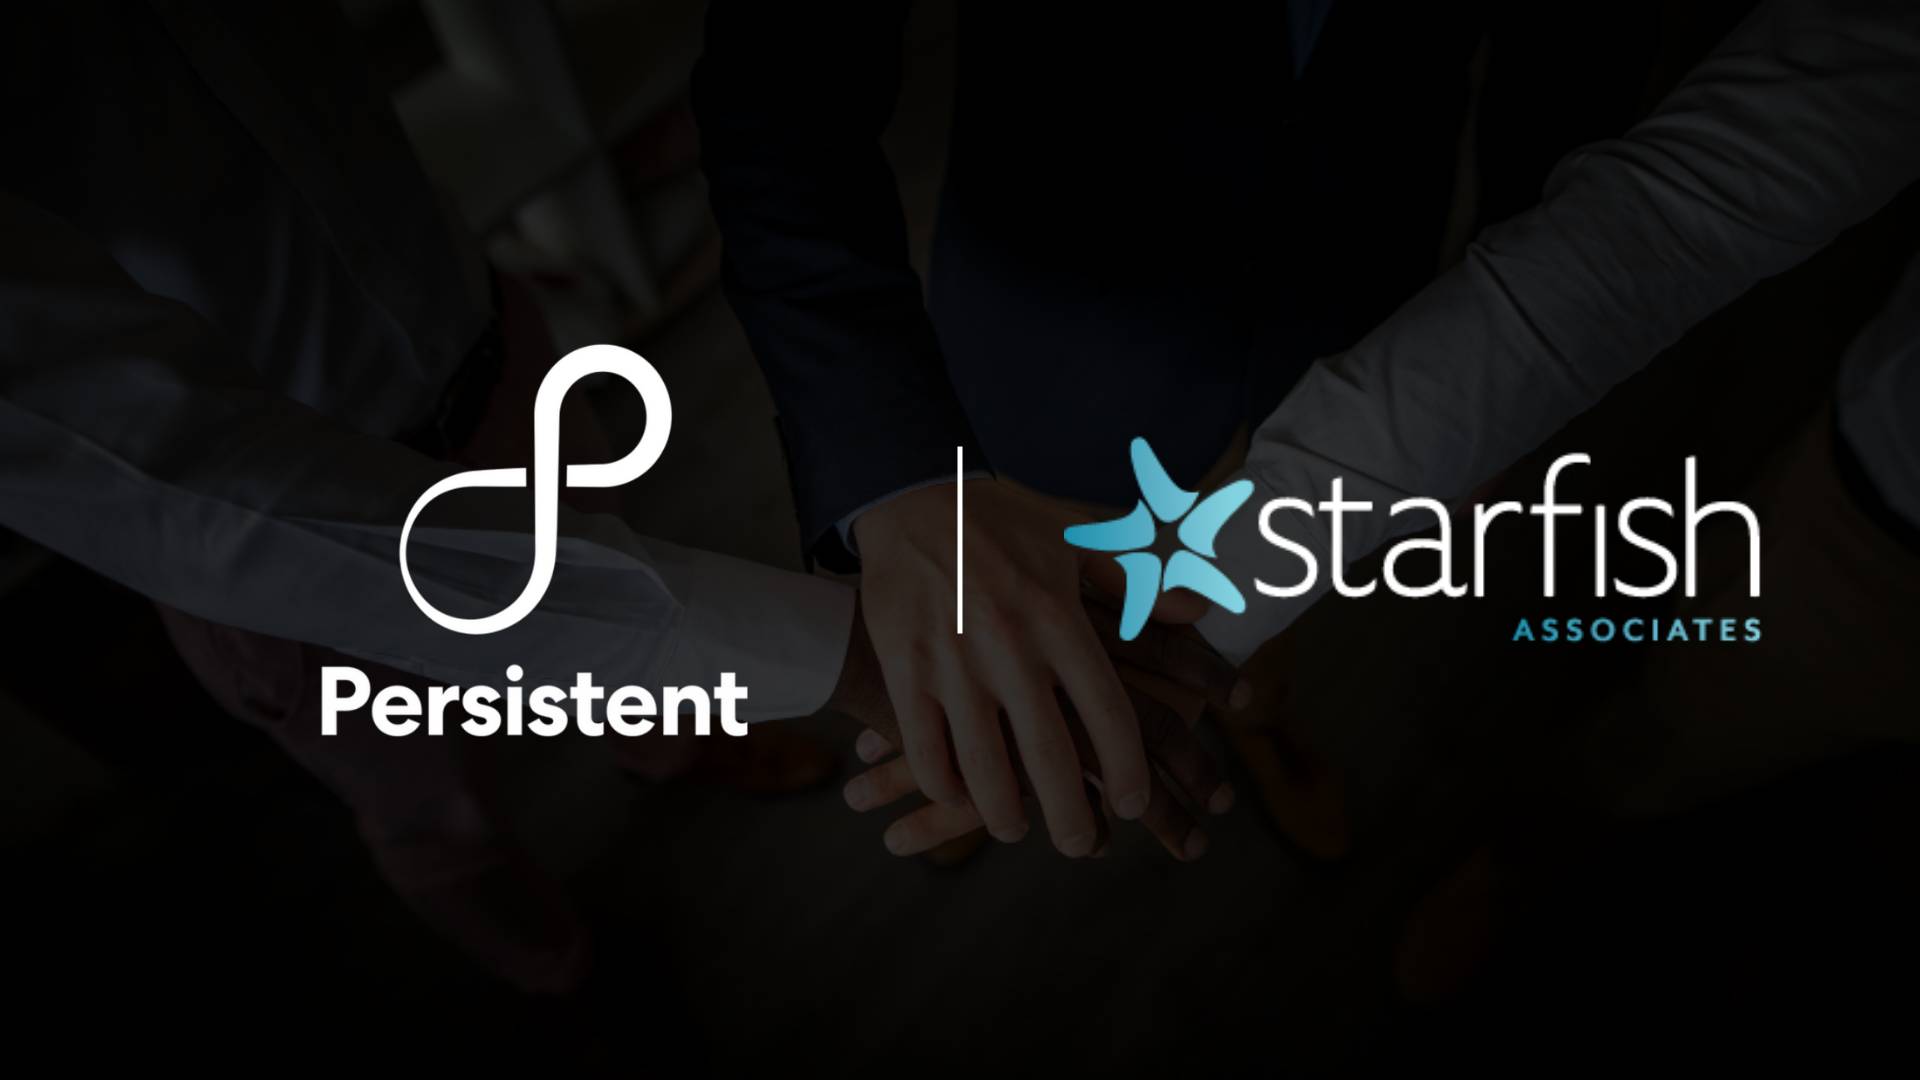 Persistent Systems Announces Acquisition of Starfish Associates to Enhance AI-Driven Contact Center and Unified Communications Capabilities